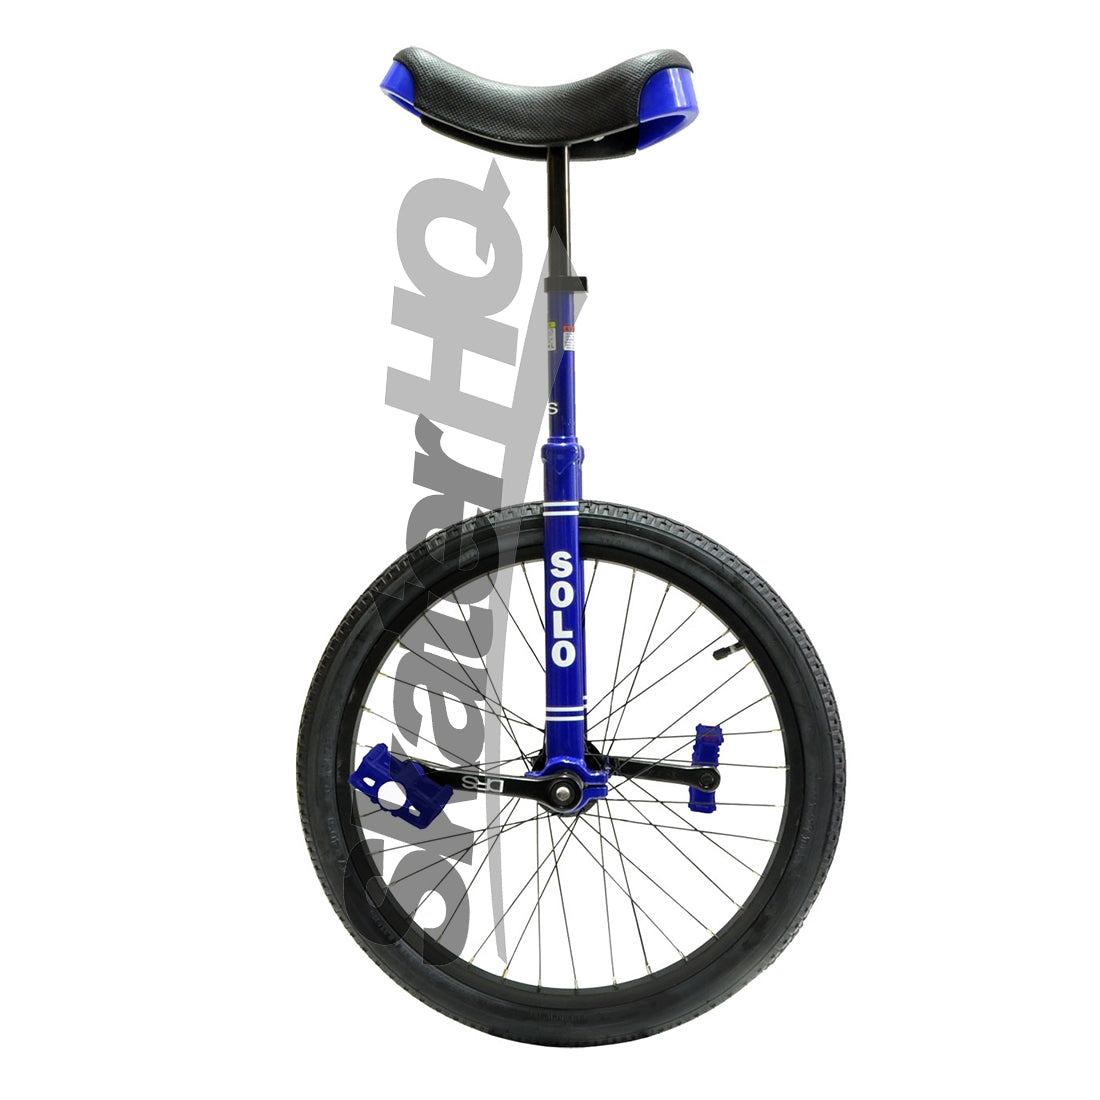 DRS Solo Expert 20inch Unicycle - Blue Other Fun Toys